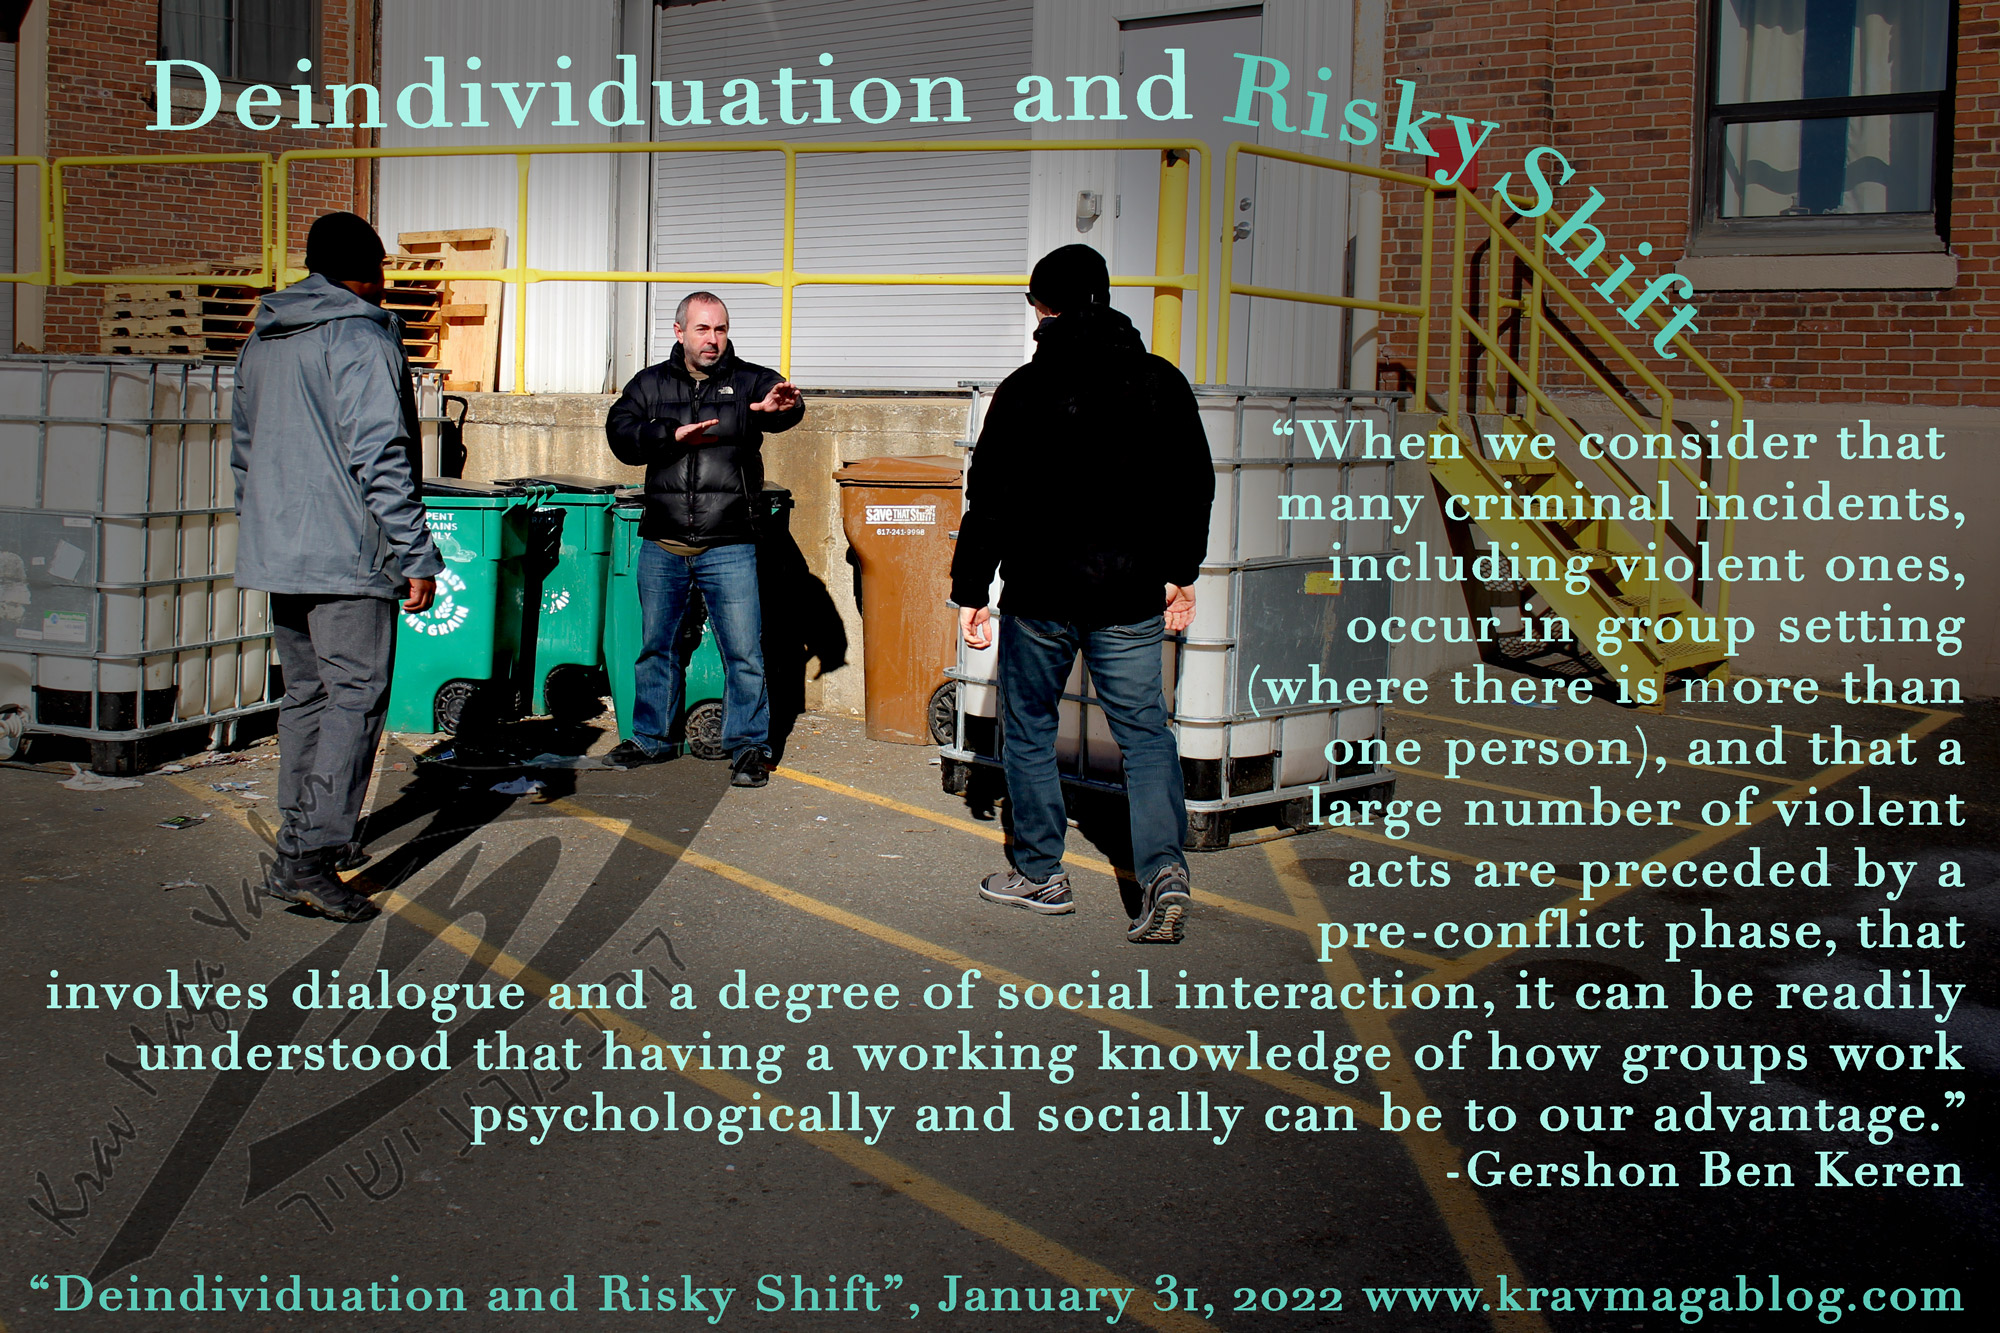 Blog About Deindividuation and Risky Shift